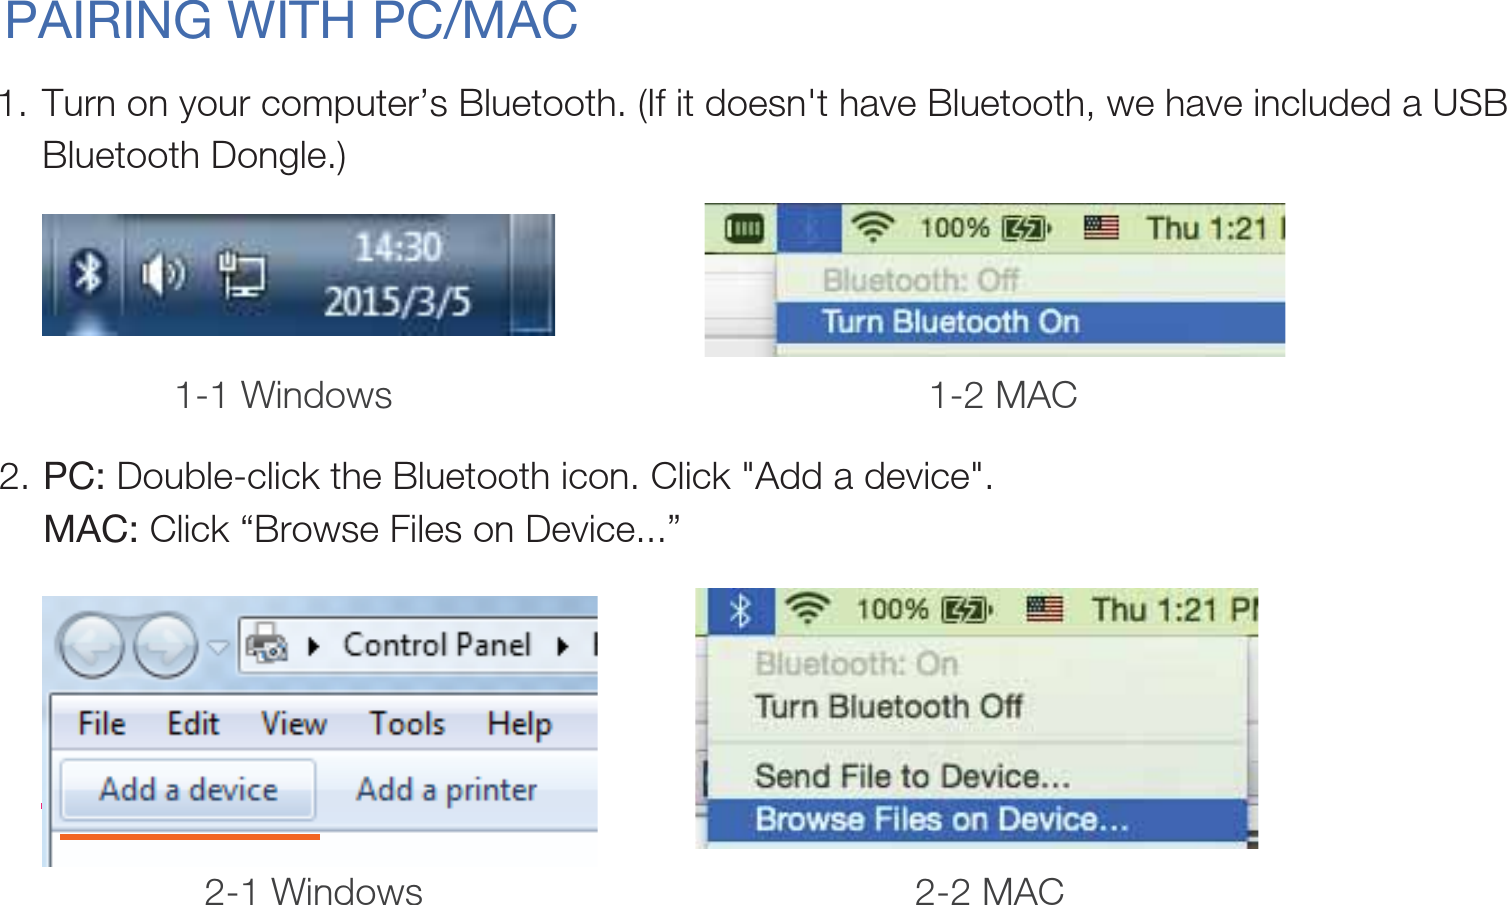 PAIRING WITH PC/MACTurn on your computer’s Bluetooth. (If it doesn&apos;t have Bluetooth, we have included a USB Bluetooth Dongle.) 1.PC: Double-click the Bluetooth icon. Click &quot;Add a device&quot;.MAC: Click “Browse Files on Device...”2.1-1 Windows 1-2 MAC2-1 Windows 2-2 MAC